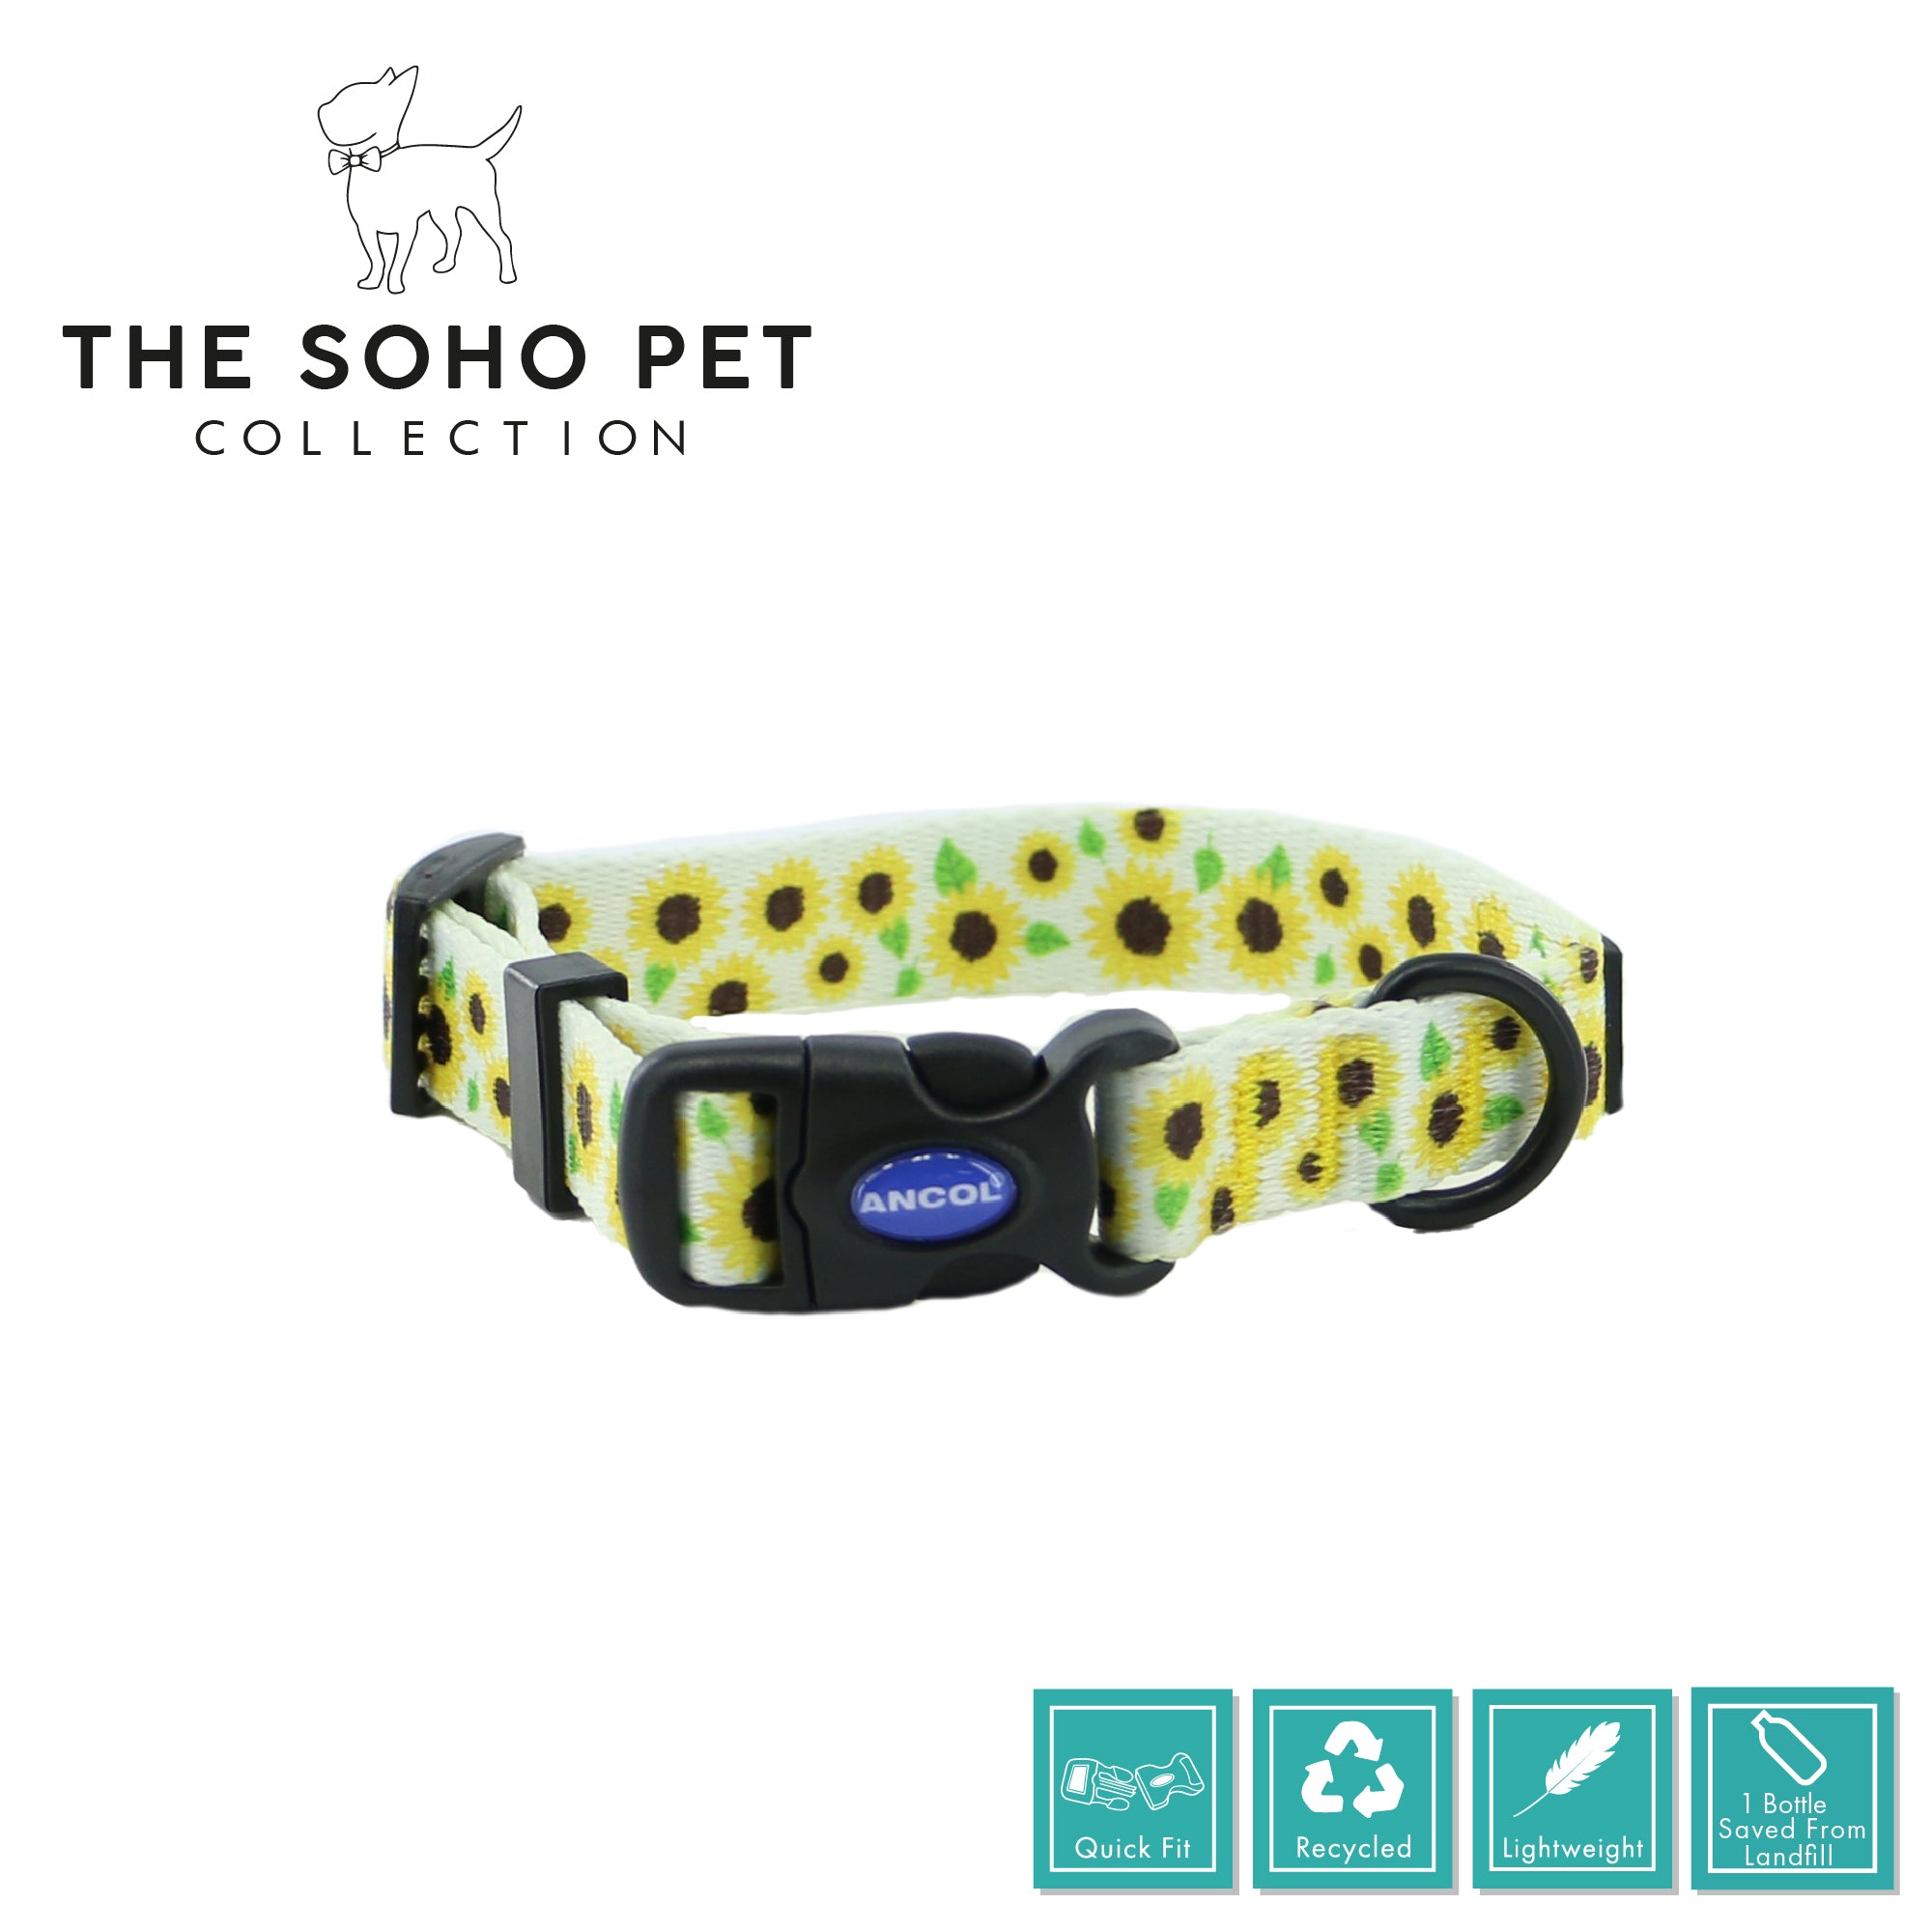 Ancol Soho Collection Patterned Dog Collar Sunflower Medium (Size 2-5)